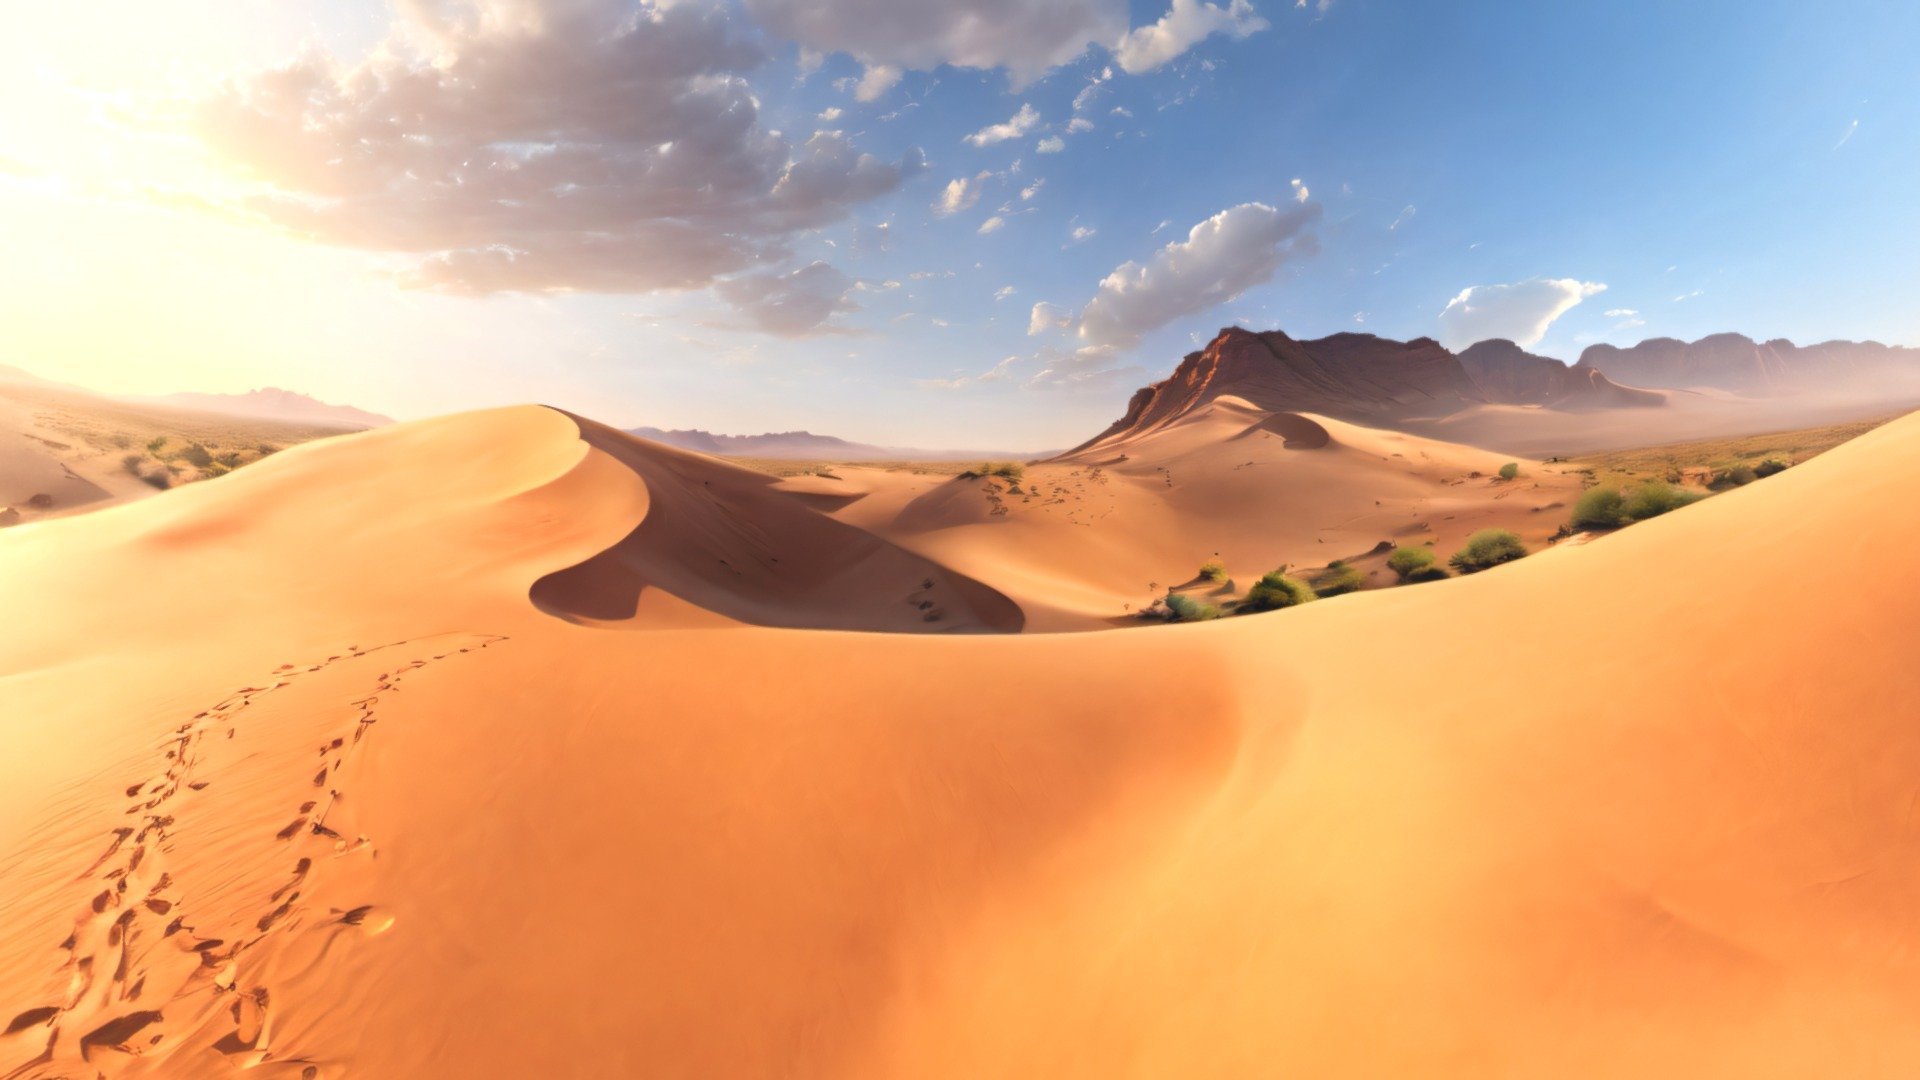 This pack contains 16 different HDRI equirectangular panoramas which will help you create 360 degrees spherical Desert backgrounds in different 3d software (Blender, Unreal Engine, Unity, 3dMax and many others). It is perfect for games, virtual reality, 3d renders, movies etc. All images were created with AI and edited in different 2d and 3d software to improve quality, remove seams and make them perfect for any 3d or 2d  Desert project.

Texture formats: HDR and JPG; 
Number of unique textures: 16; 
Number of 3d models: 1; 
Texture resolutions: 8k (8192 x 4096); - HDRI Desert Panoramas Megapack - Buy Royalty Free 3D model by Ionut81 3d model